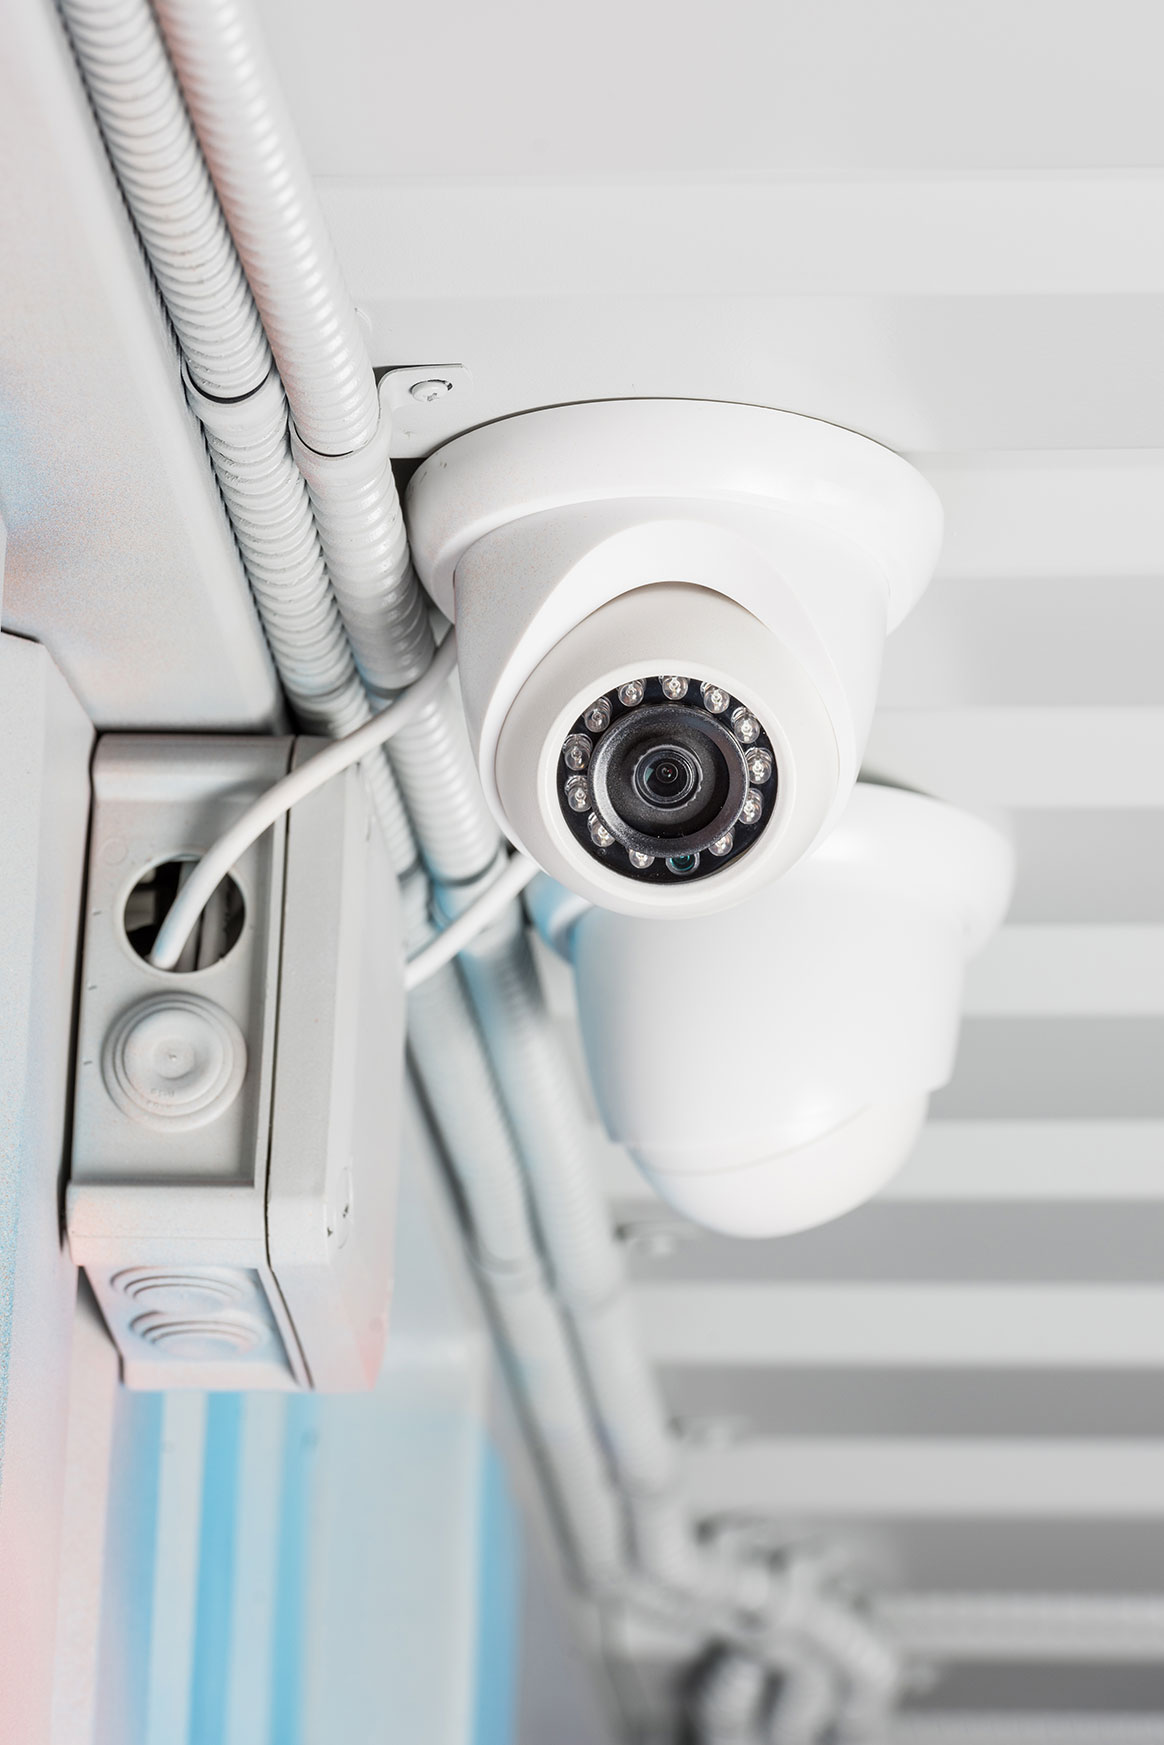 white-security-camera-on-ceiling-home-security-sys